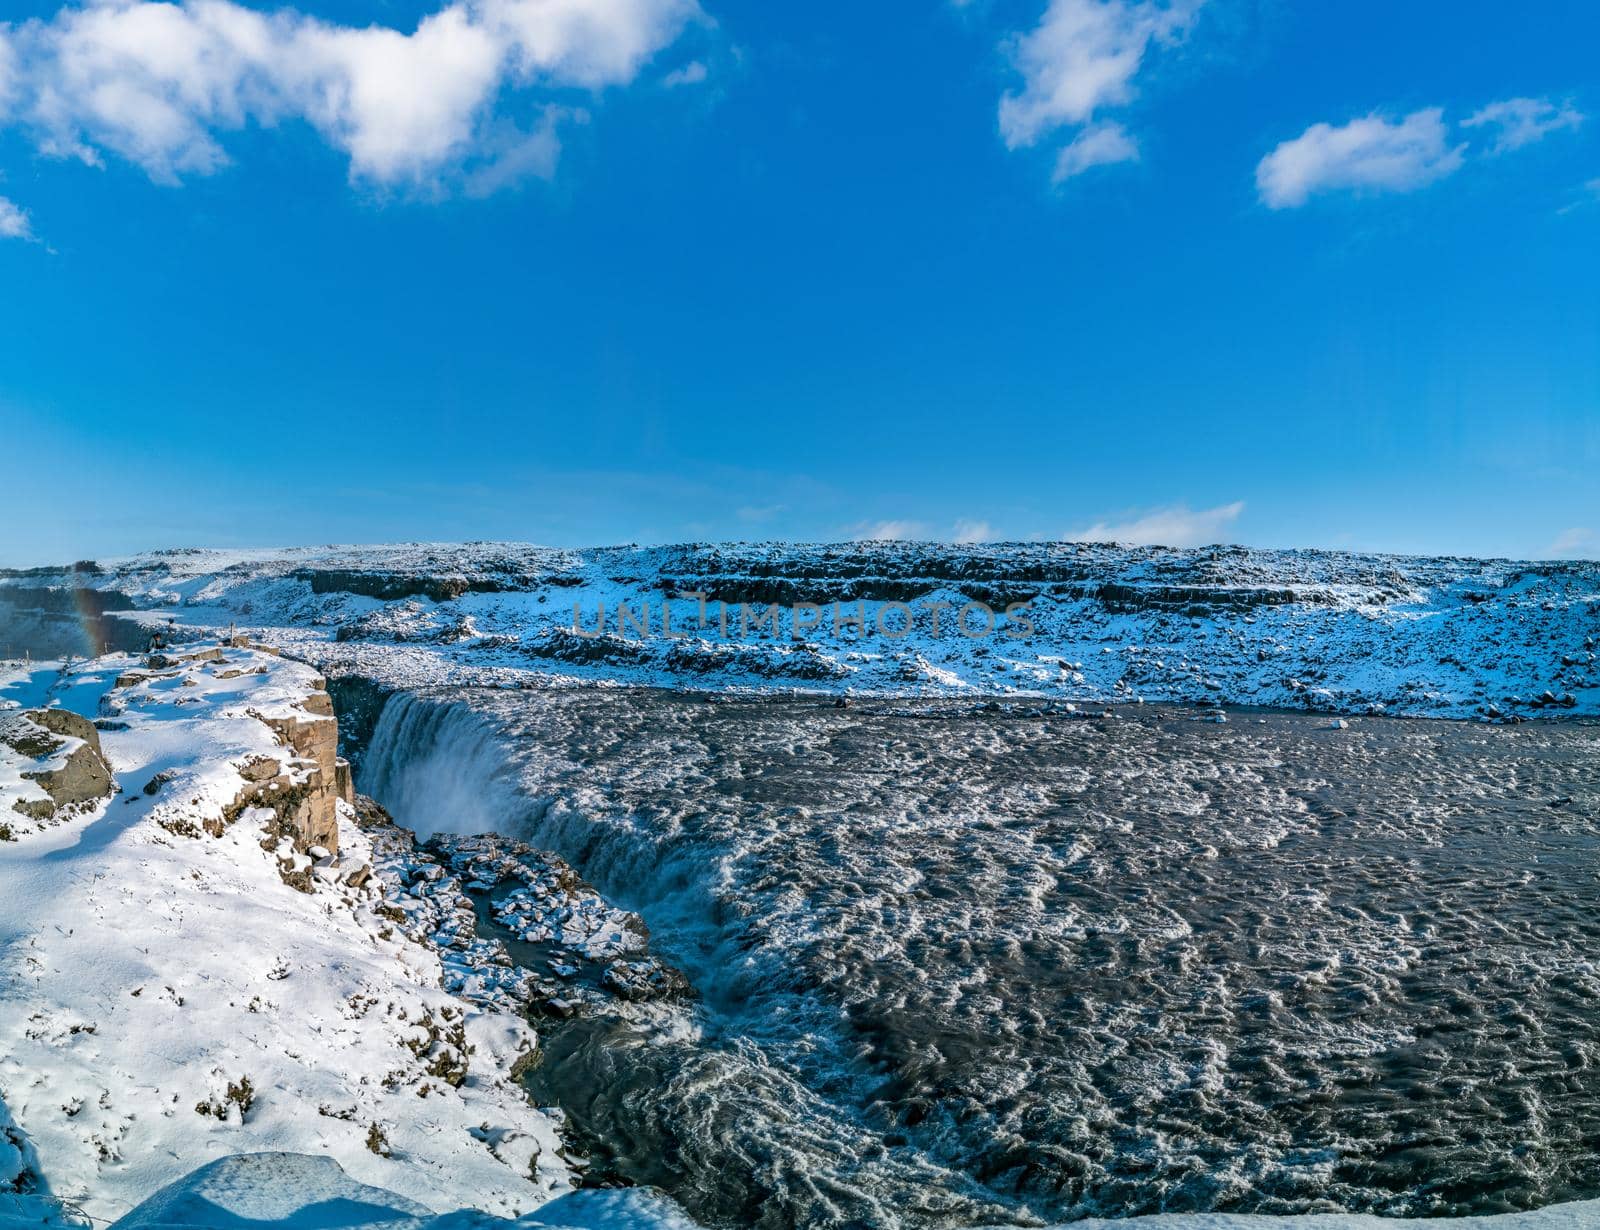 Dettifoss massive waterfall panoramic view and blue sky for text